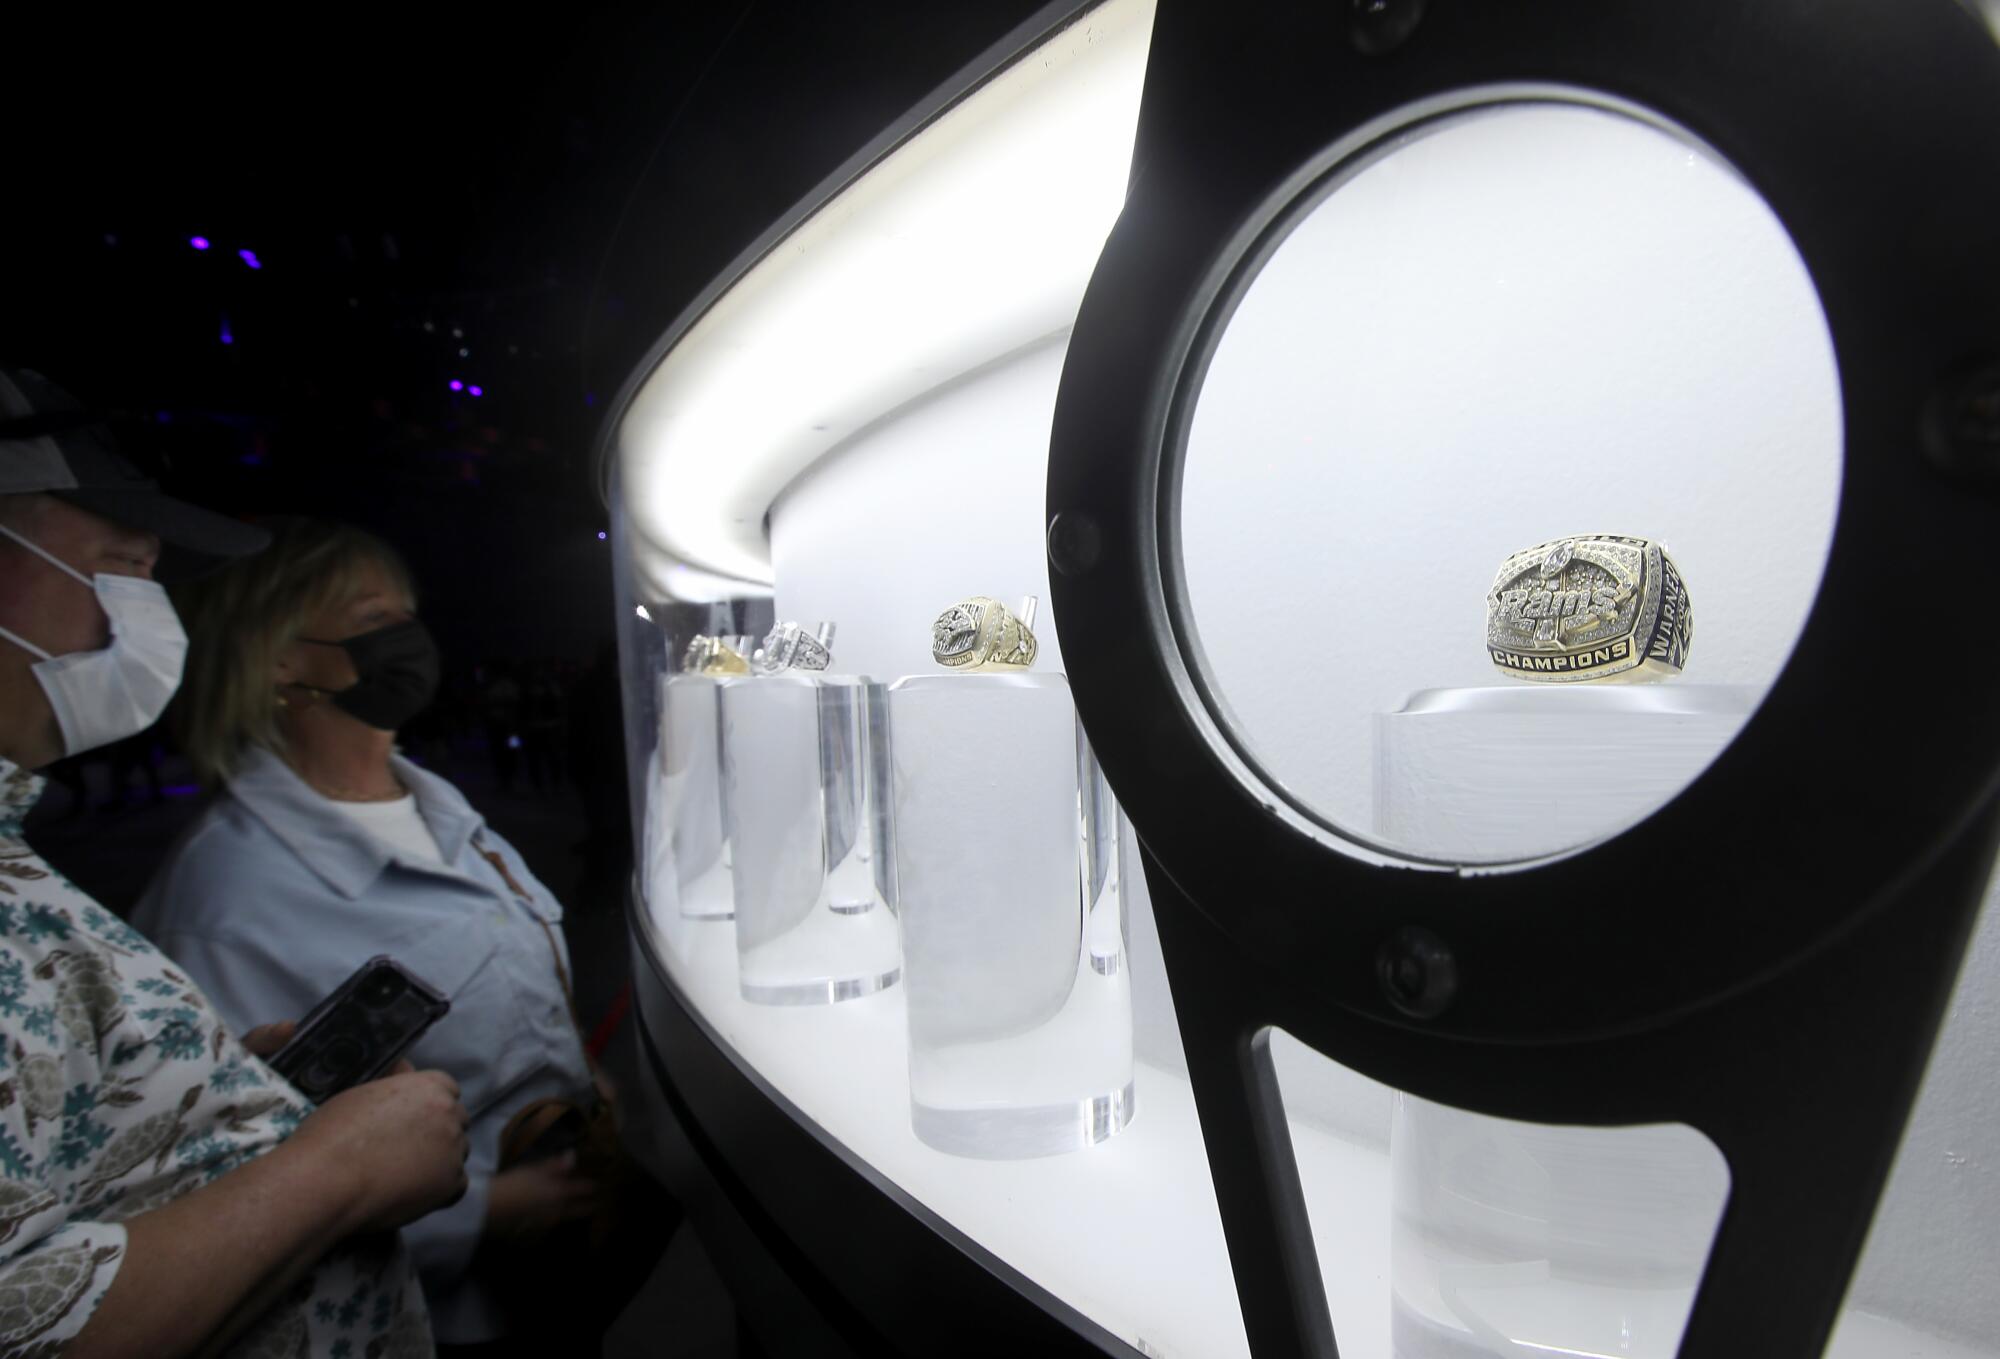 A Rams Super Bowl ring is part of a display at the Super Bowl Experience.